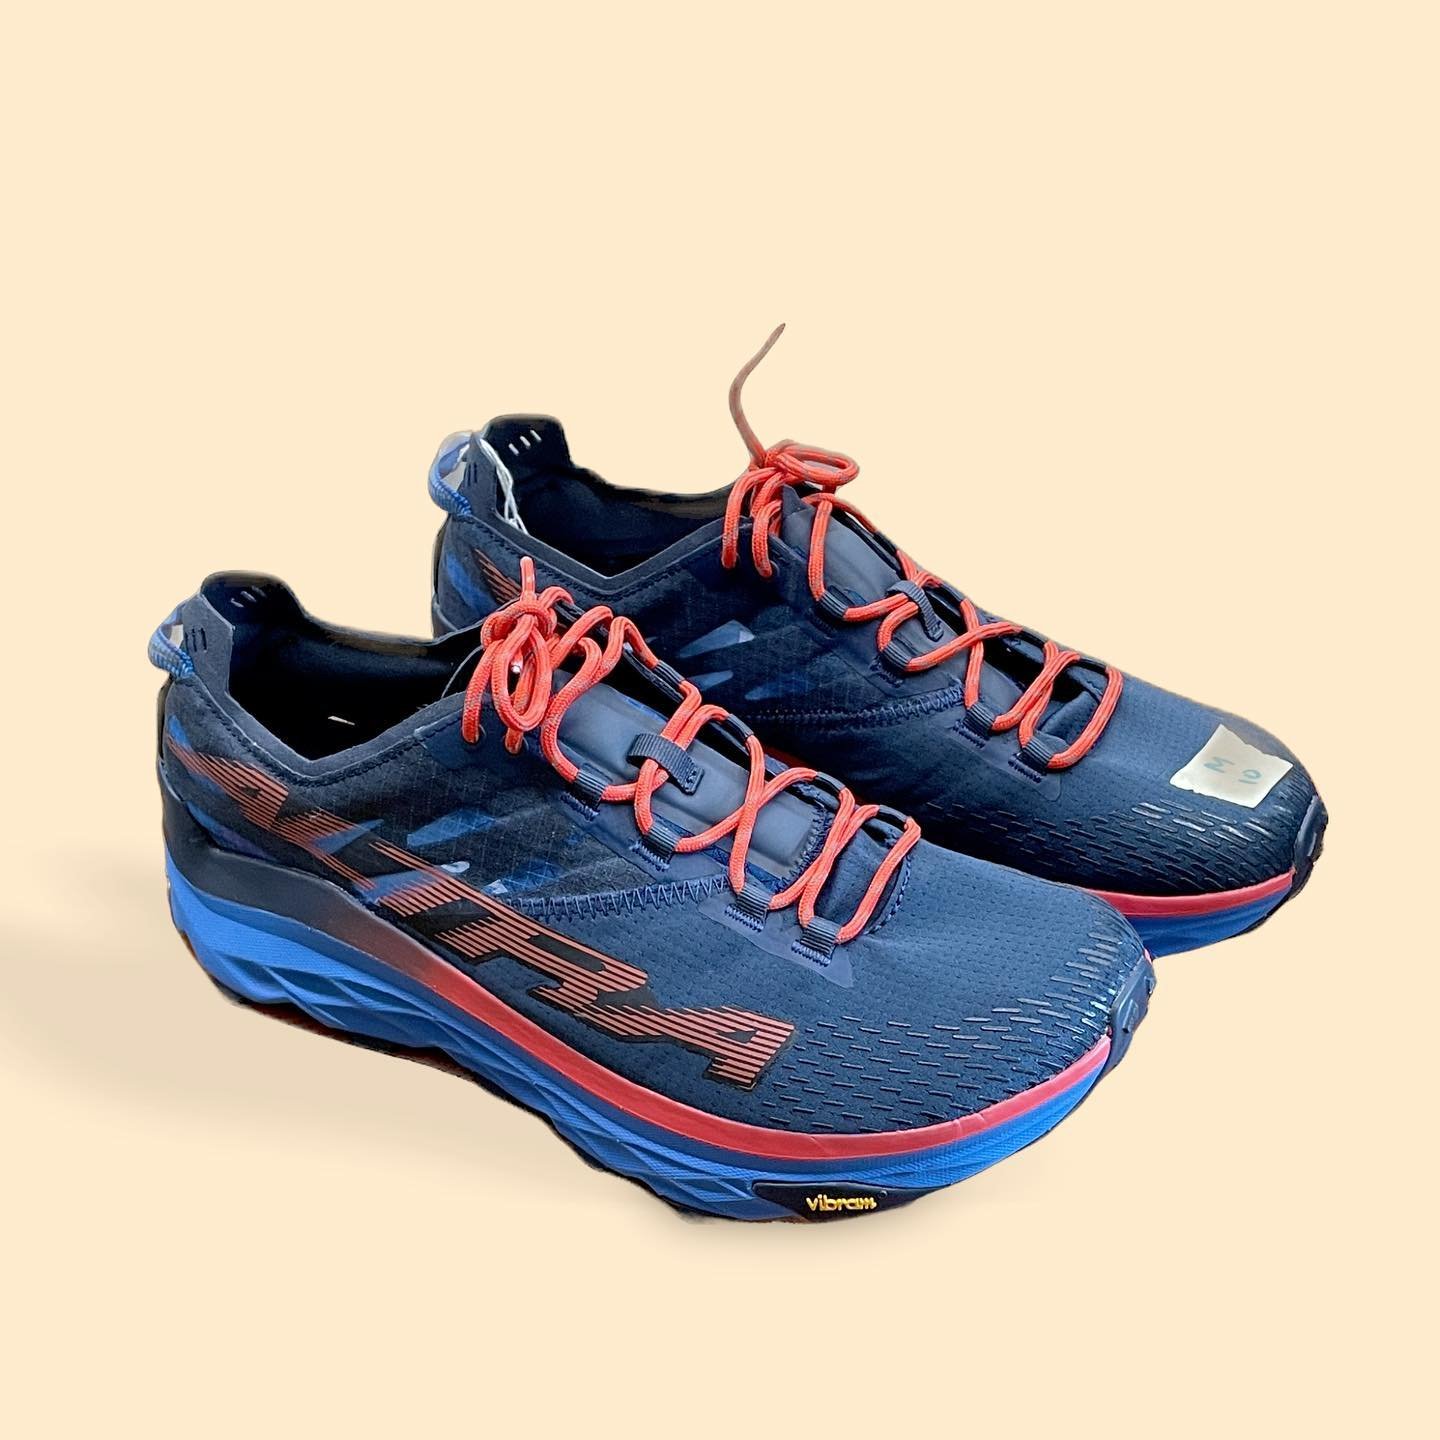 Freshies for Spring! 🌻🏔️🏃&zwj;♂️

Altra Mount Blanc
MSRP: $179
Cc: $99 *Brand New!*
Size: M 10